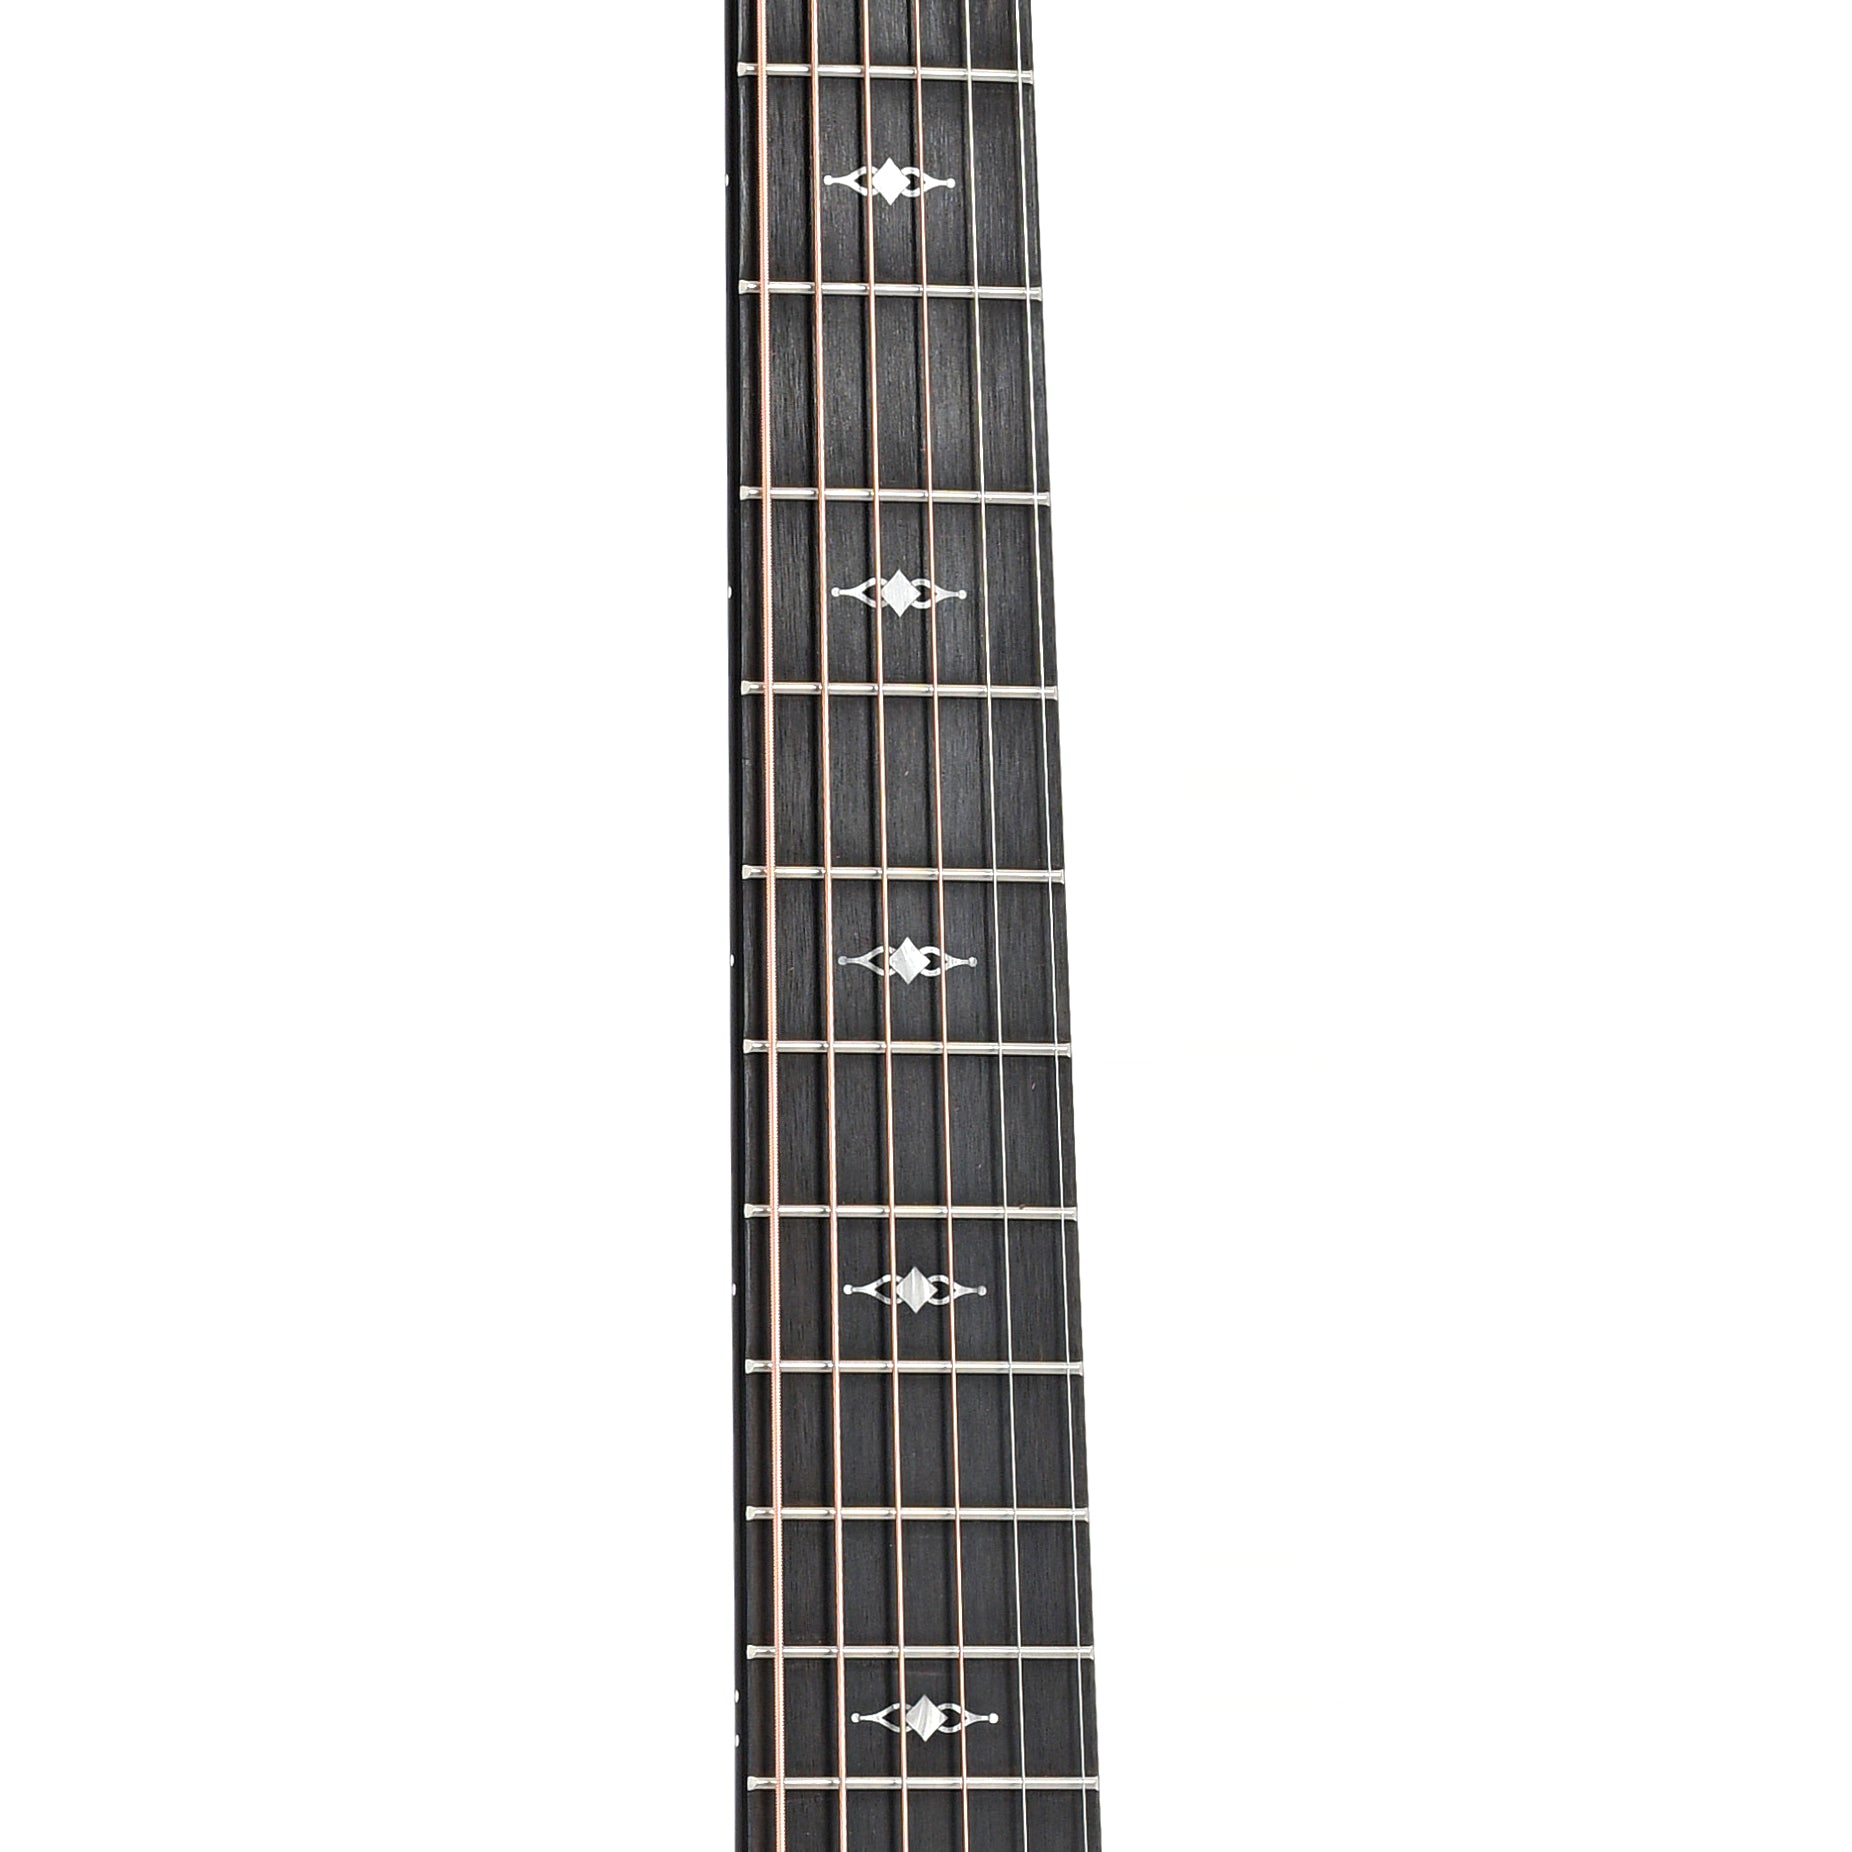 Fretboard of Taylor 326ce Acoustic-Electric Guitar